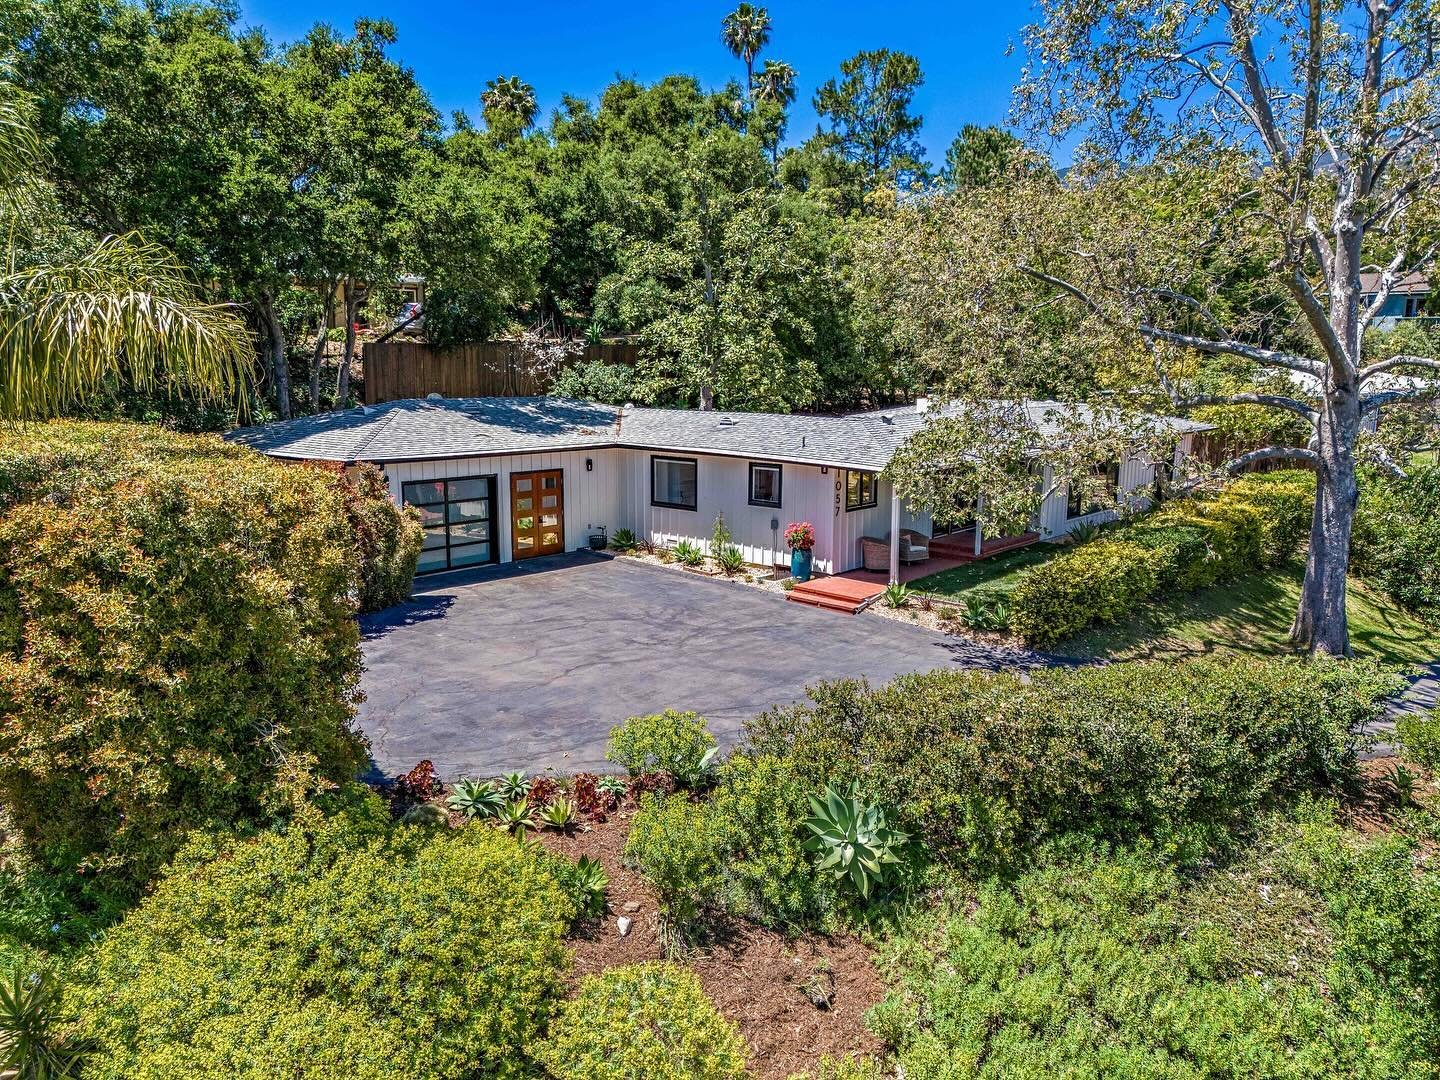 1057 Tunnel Road. Come see us today from 10am-1pm! Mission Canyon Mid-Century 3 bedroom, 2 bath home in a tranquil setting with beautiful mountain views, situated on just under a half acre. Spacious living &amp; dining area with vaulted open beam cei